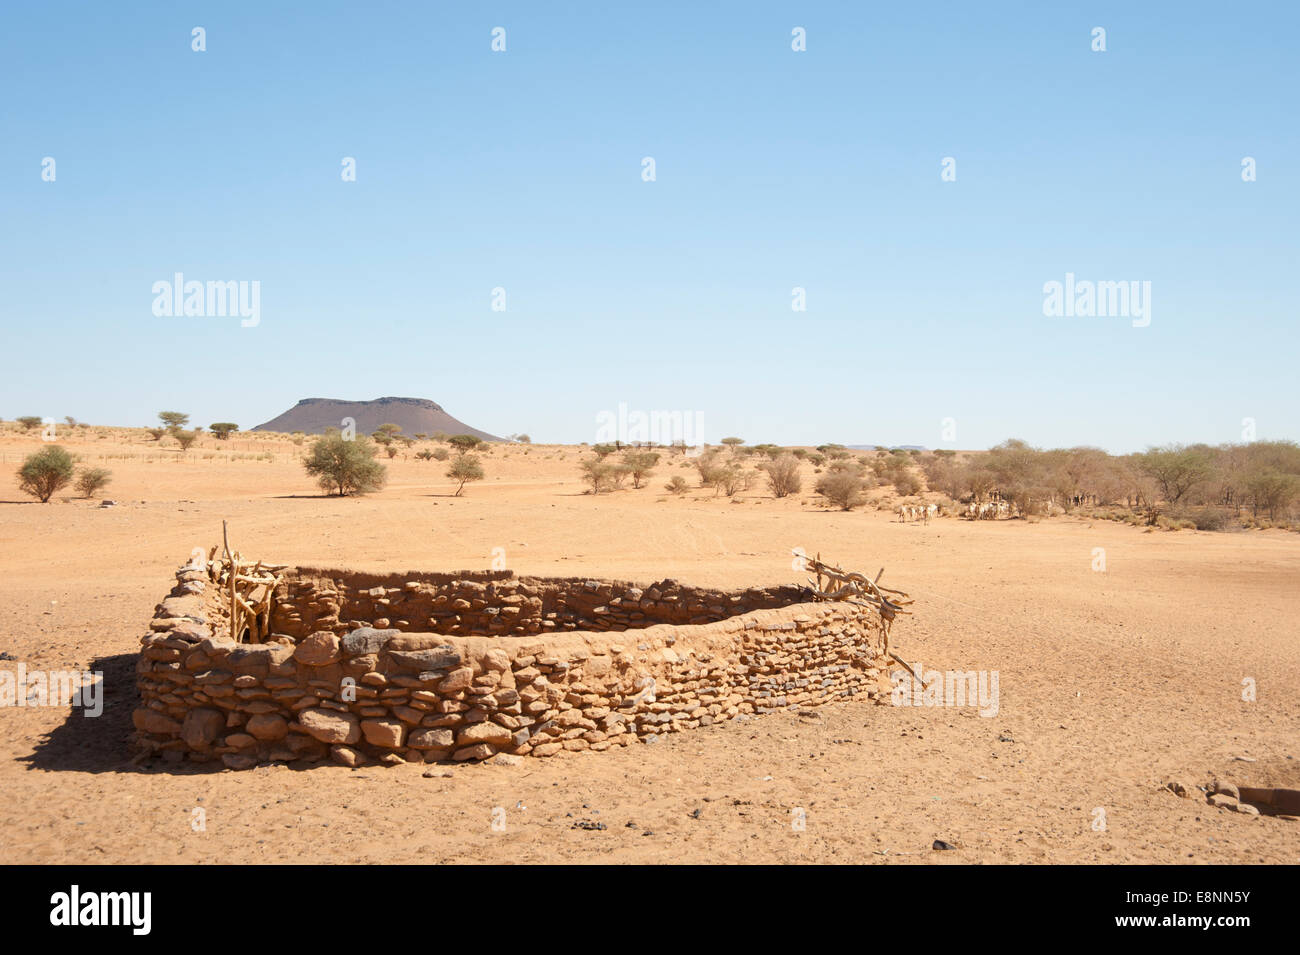 A watering hole in the Sudanese Desert. Tribes travel for miles to collect Stock Photo